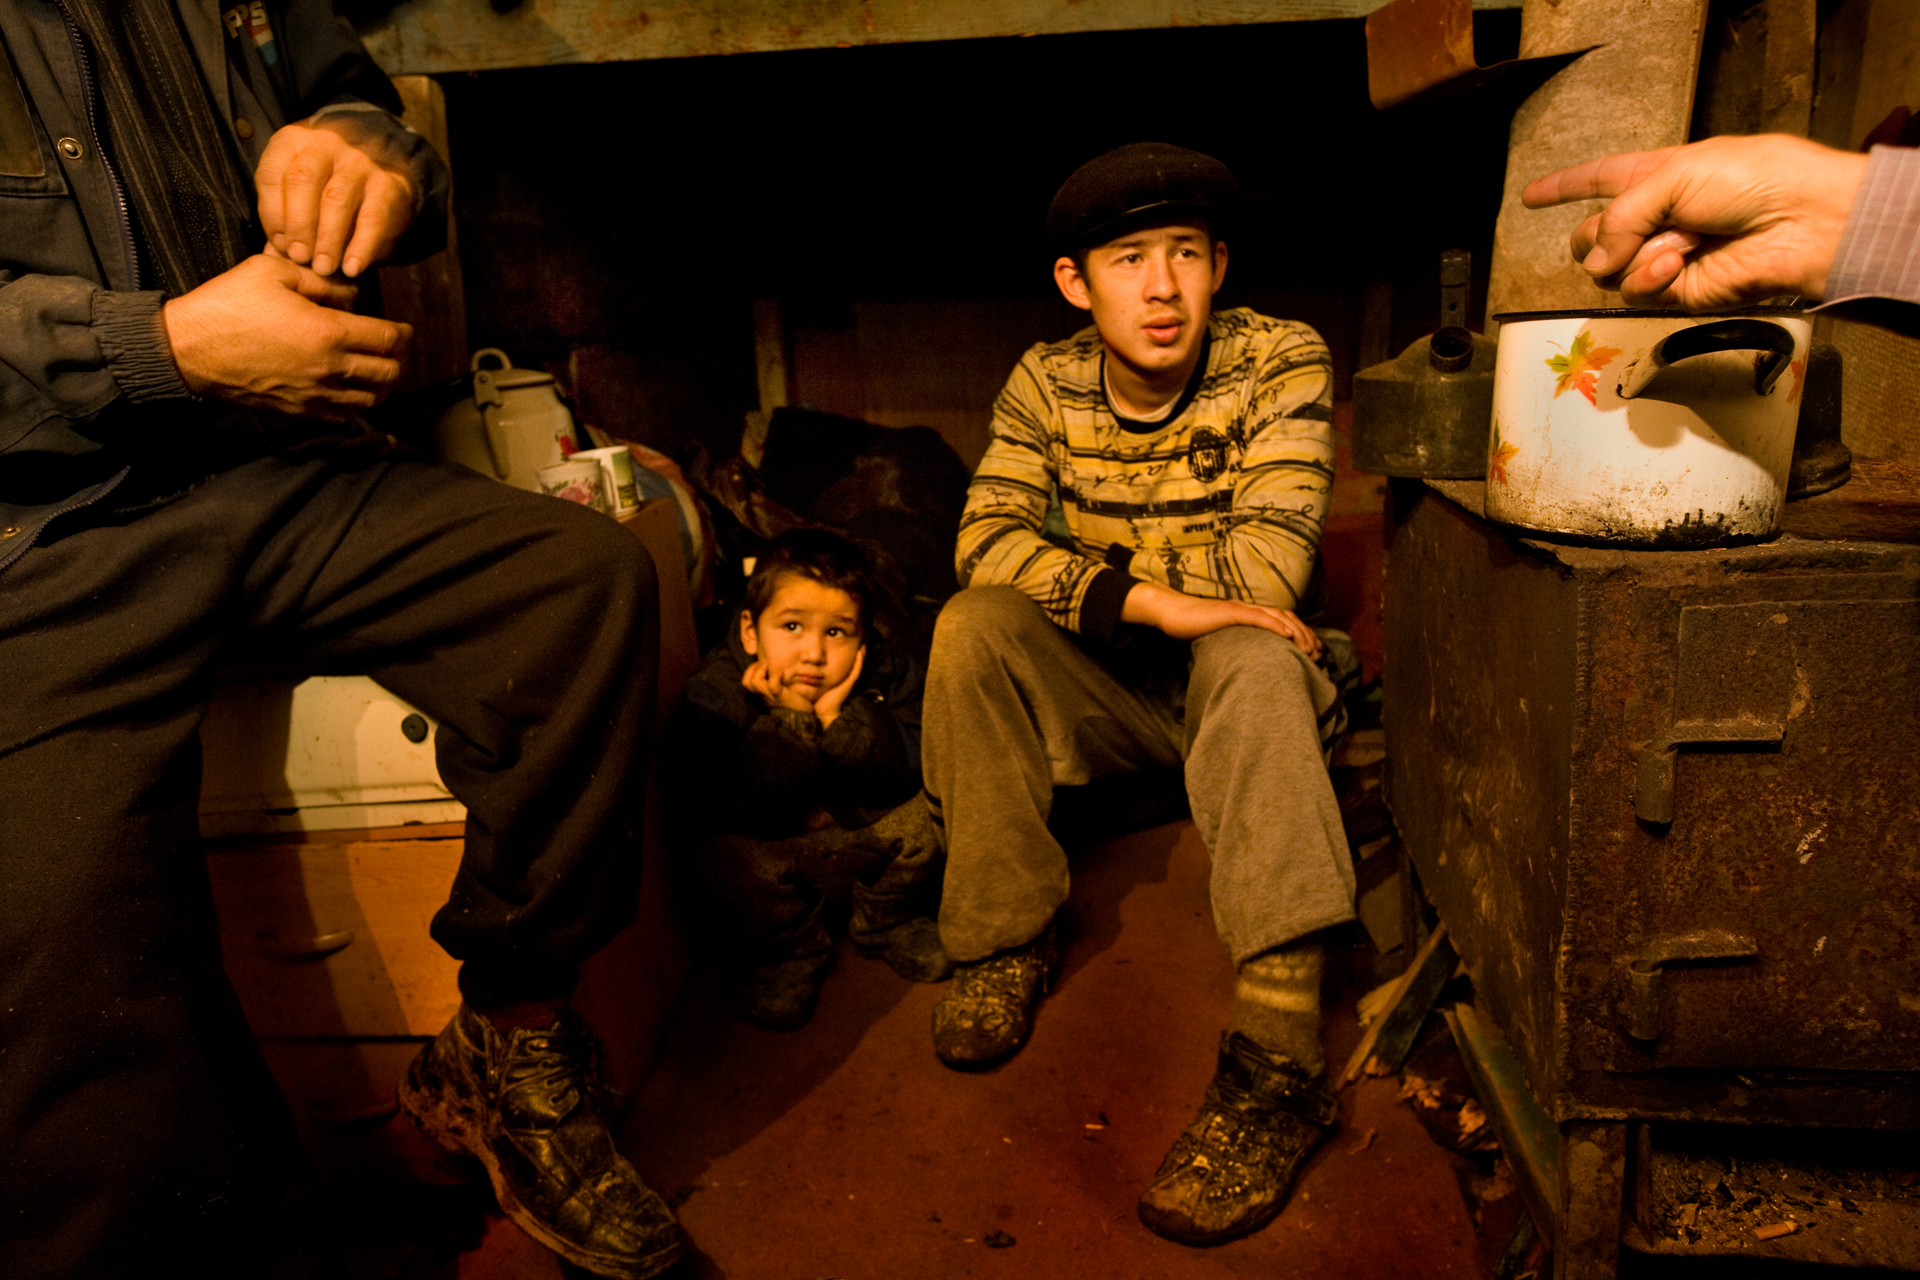  5:52 PM - A family in their bleak make-shift home in Chelobityevo, 'gastarbeiter' colony on the outskirts of Moscow. 